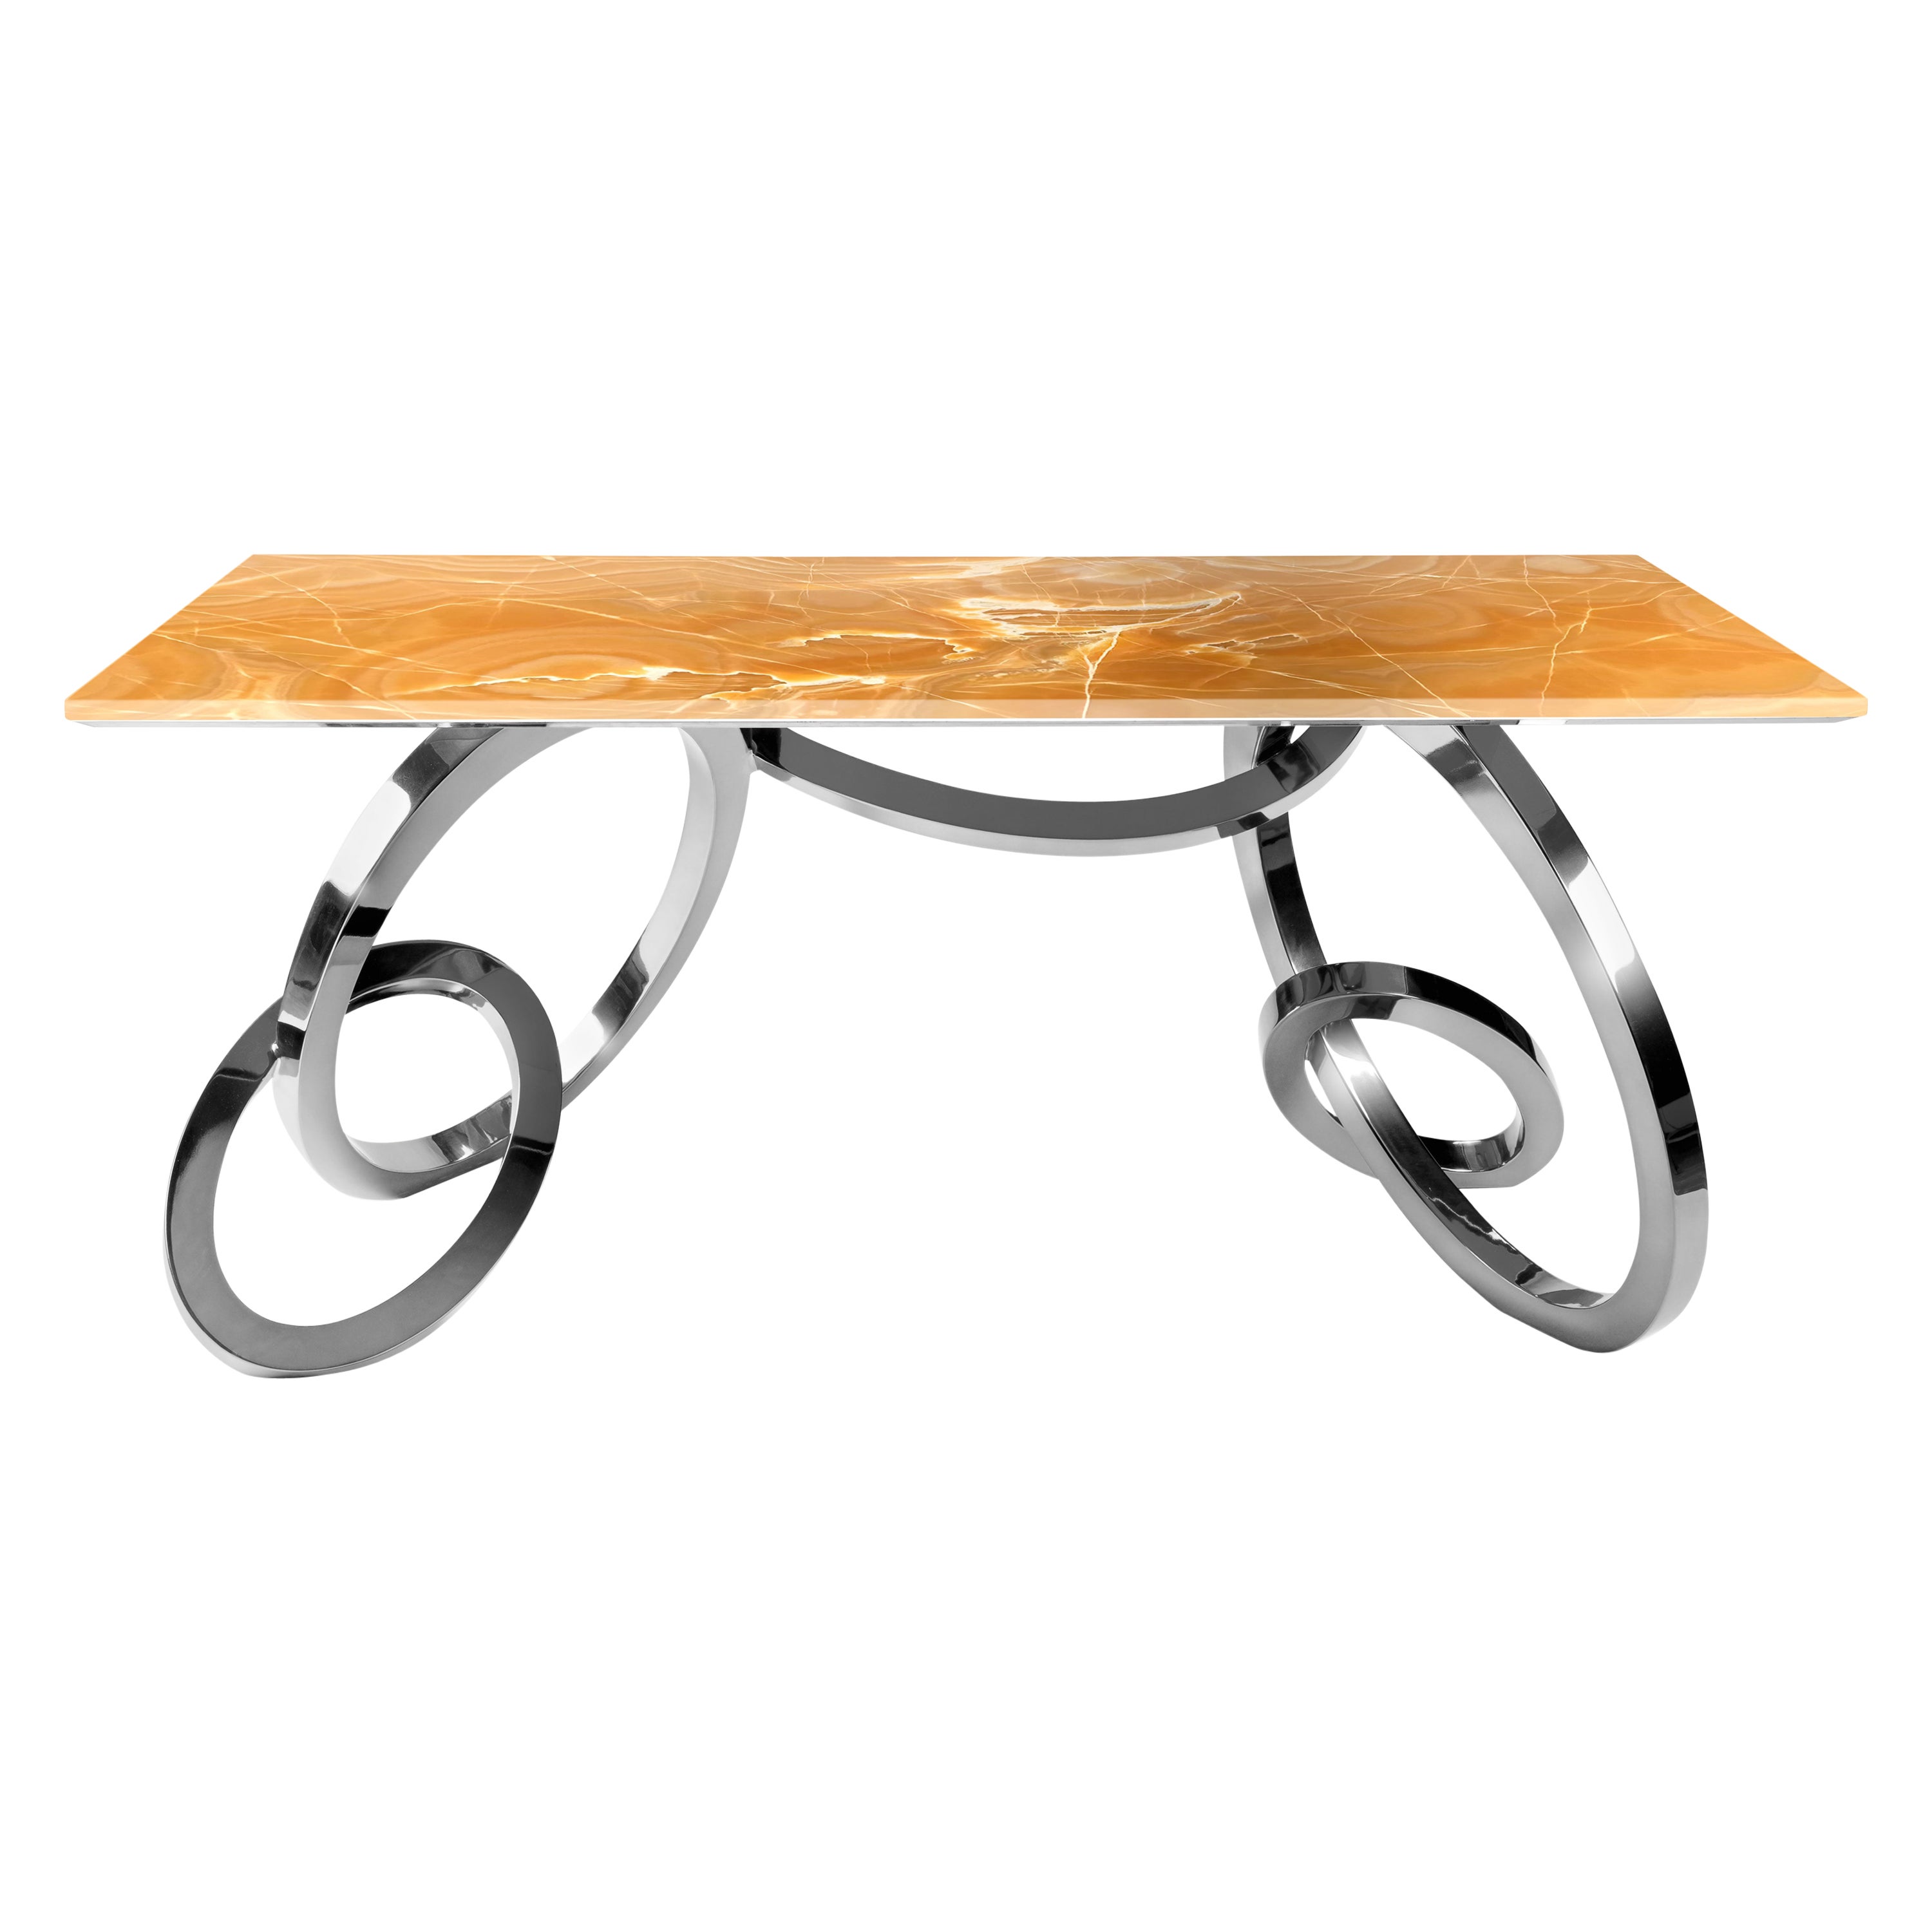 Table Desk Writing Home Office Orange Onyx Mirror Steel Contemporary Collectible For Sale